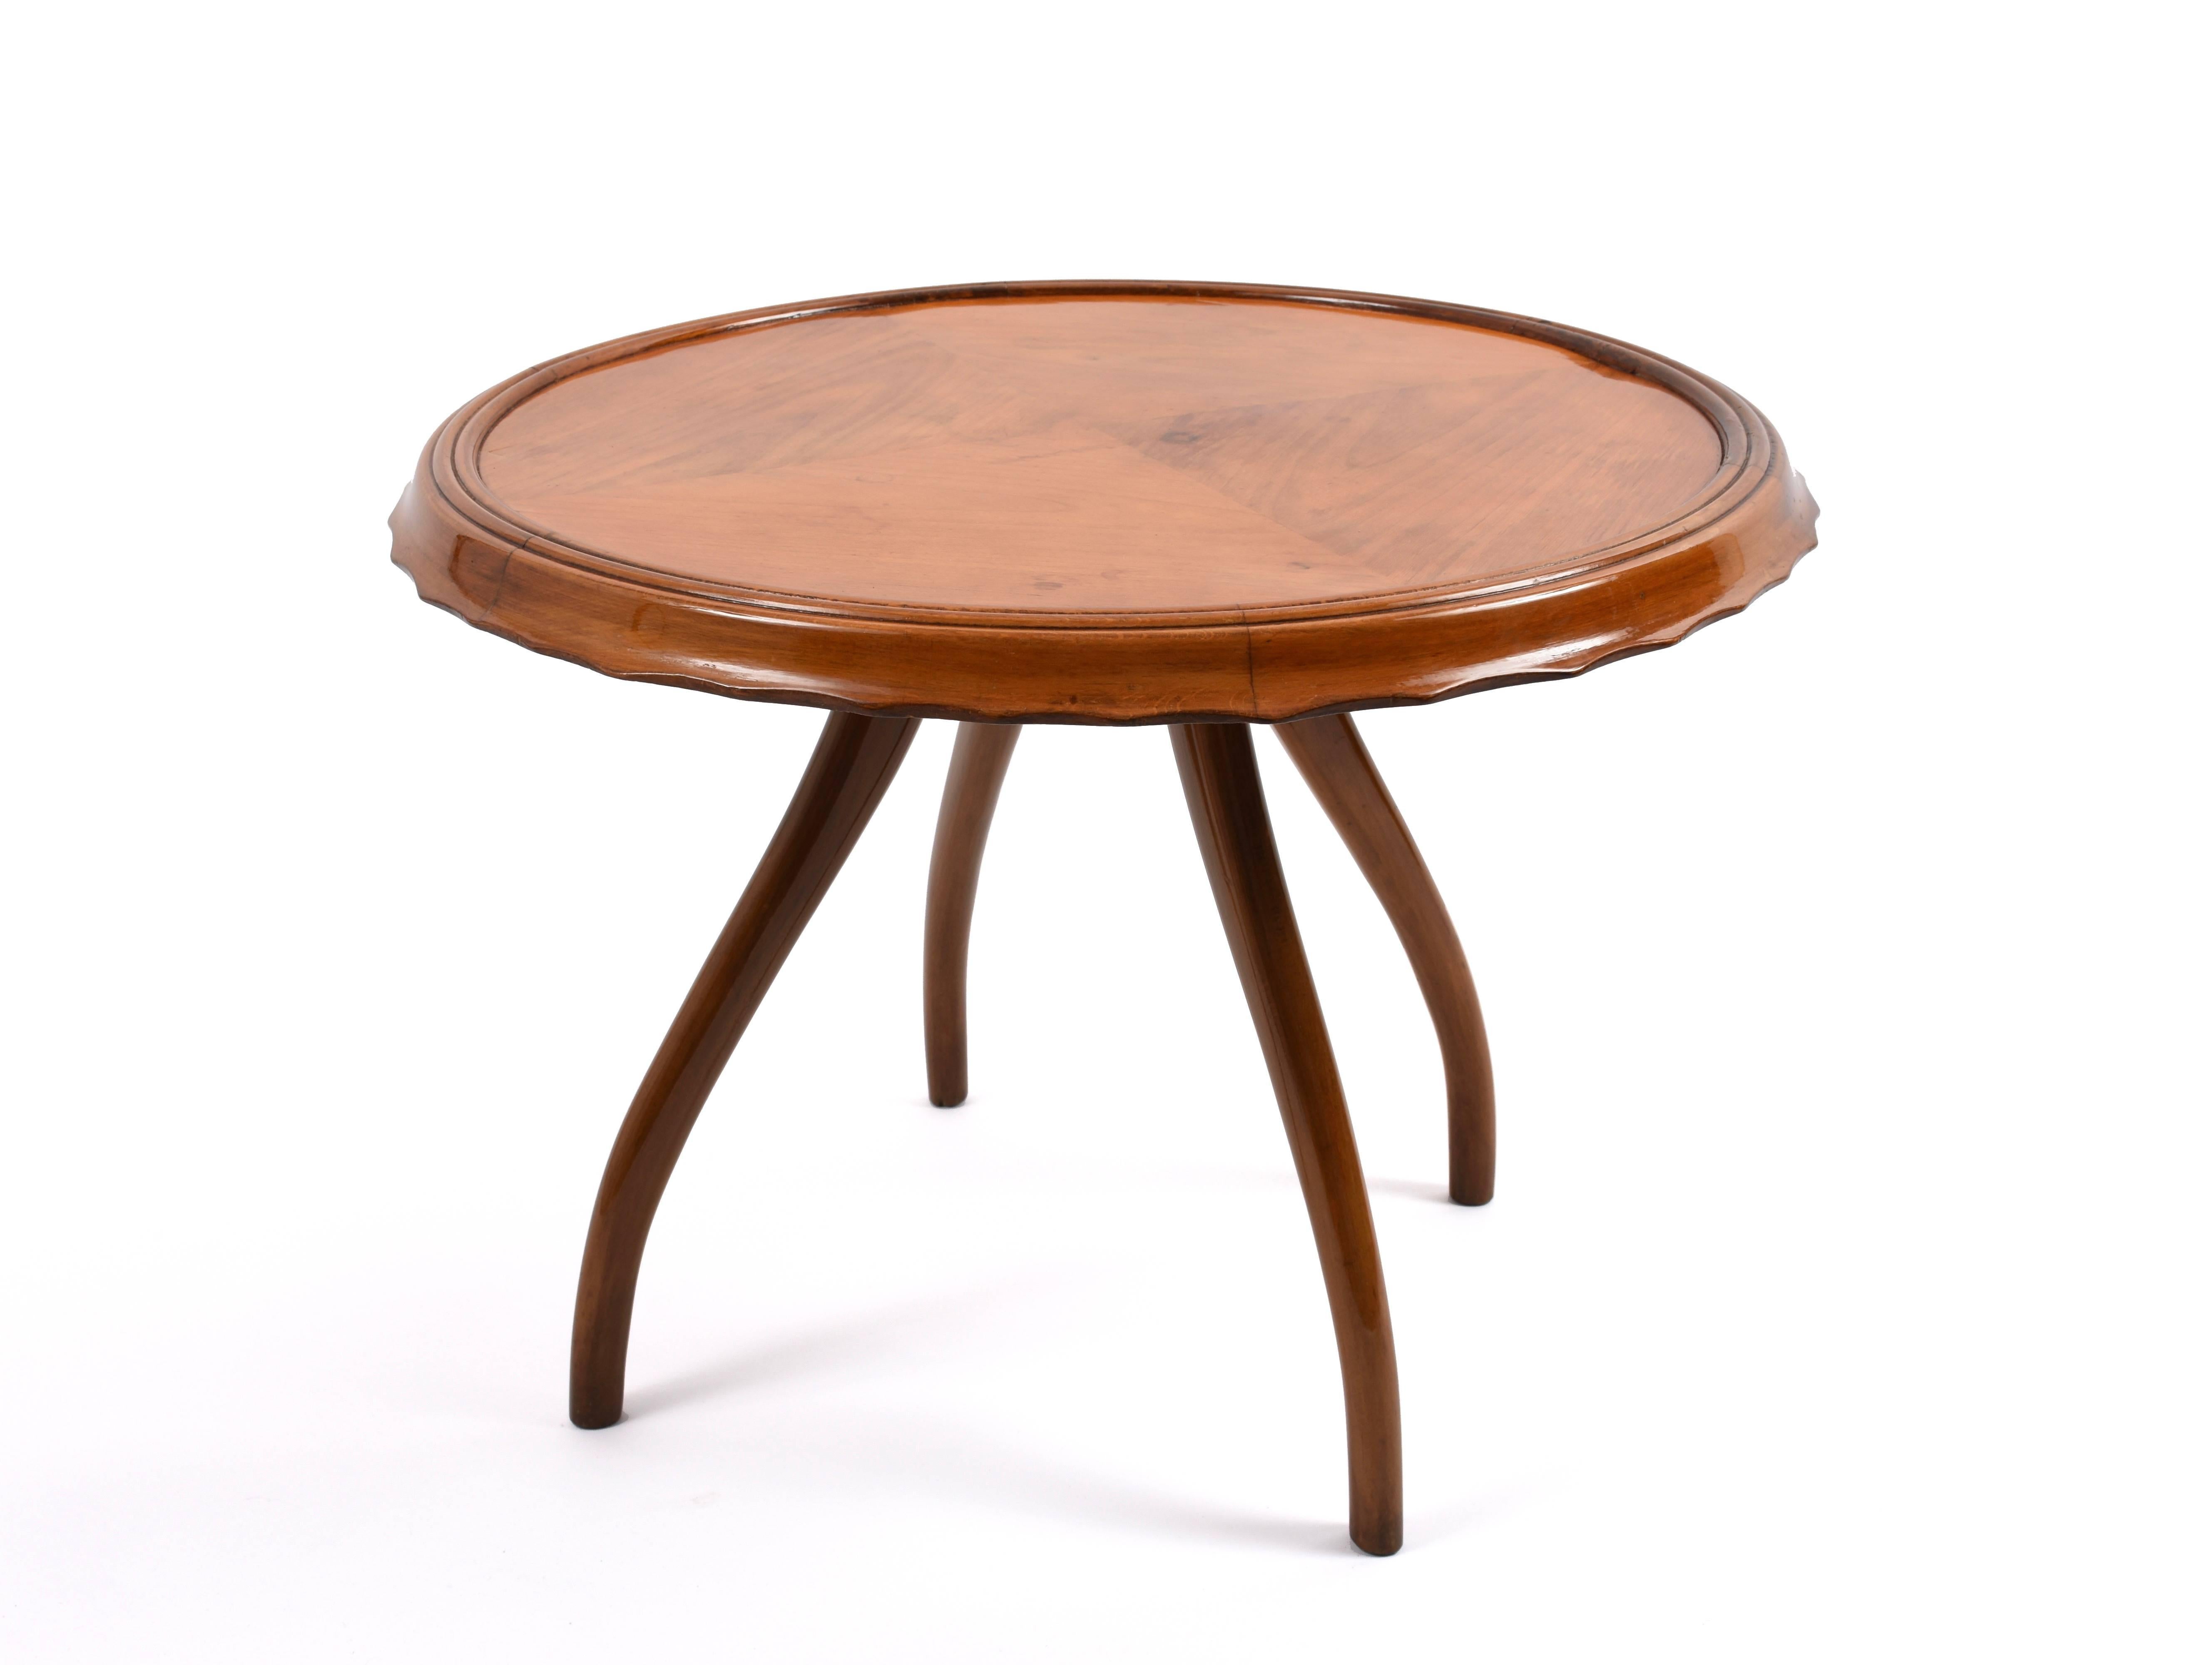 Round cherrywood side table, 1940s. In very good condition.